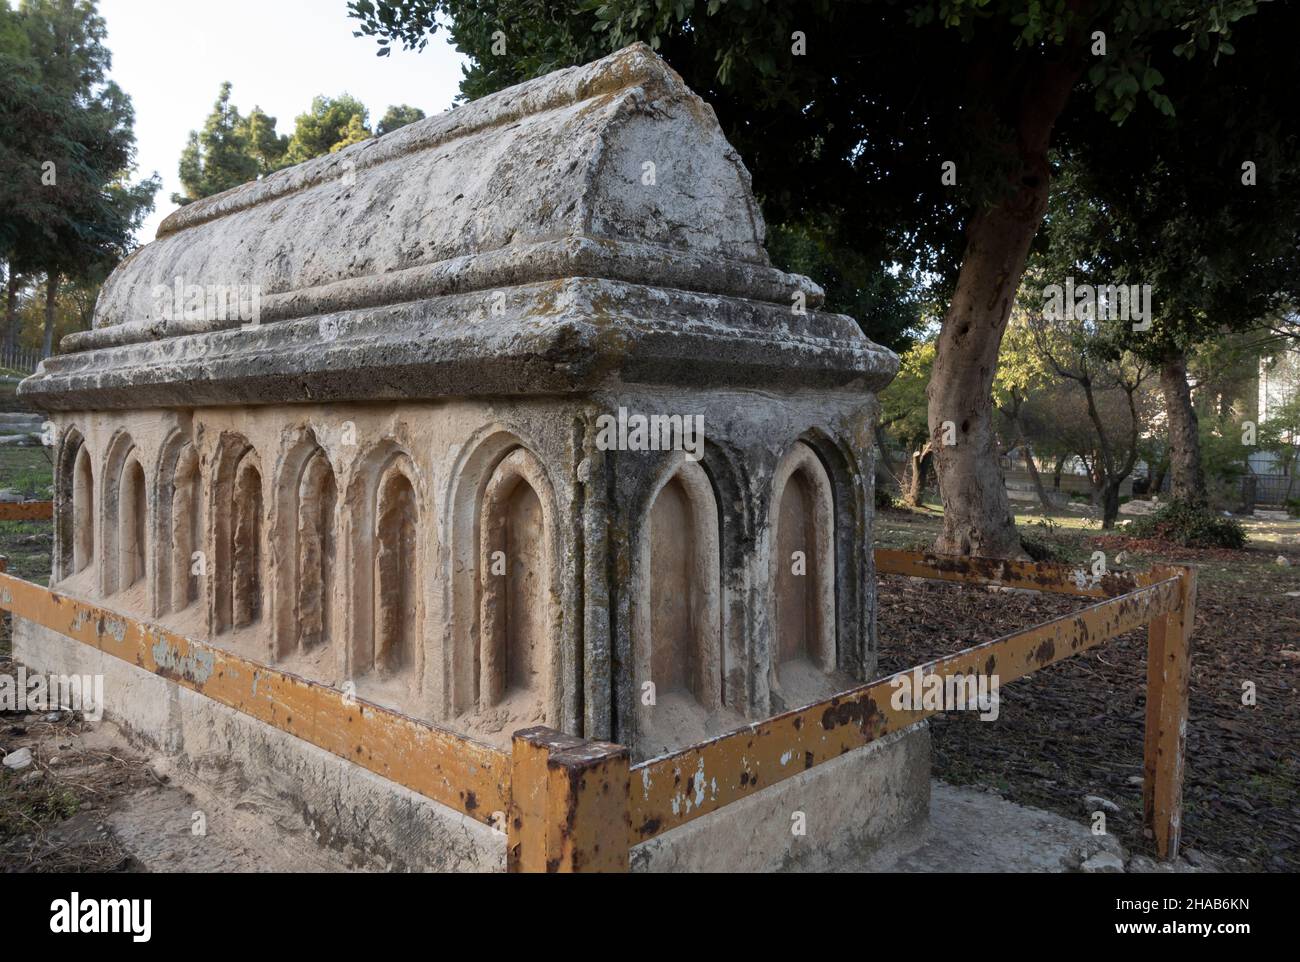 Old tombstone at the Mamilla Cemetery a historic Muslim cemetery located in the center of west Jerusalem Israel. The cemetery contains the remains of figures from the early Islamic period, Sufi shrines and Mamluk era tombs. Stock Photo